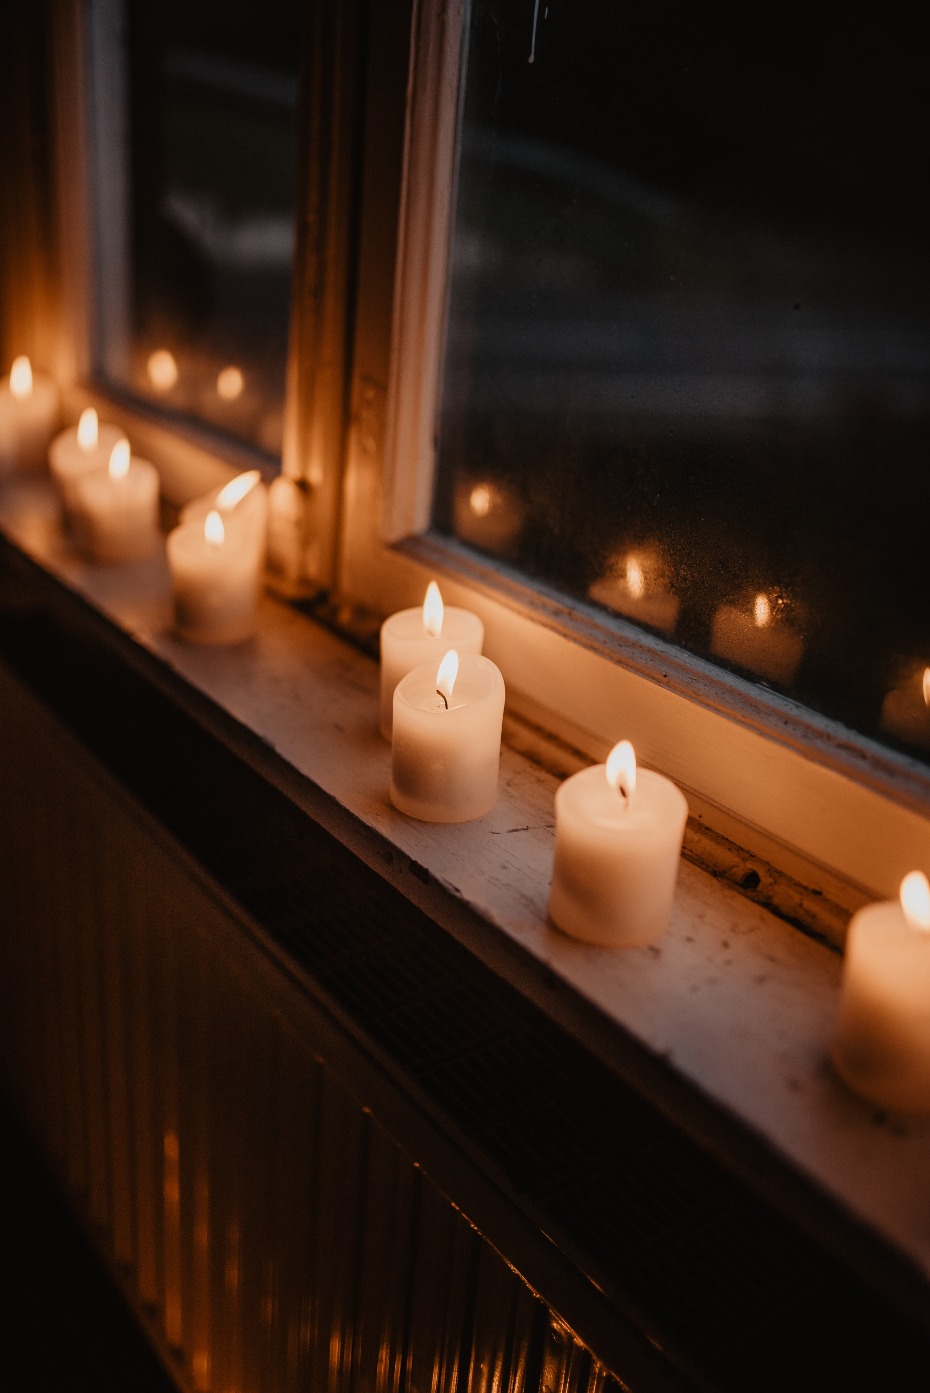 Candles make everything more romantic